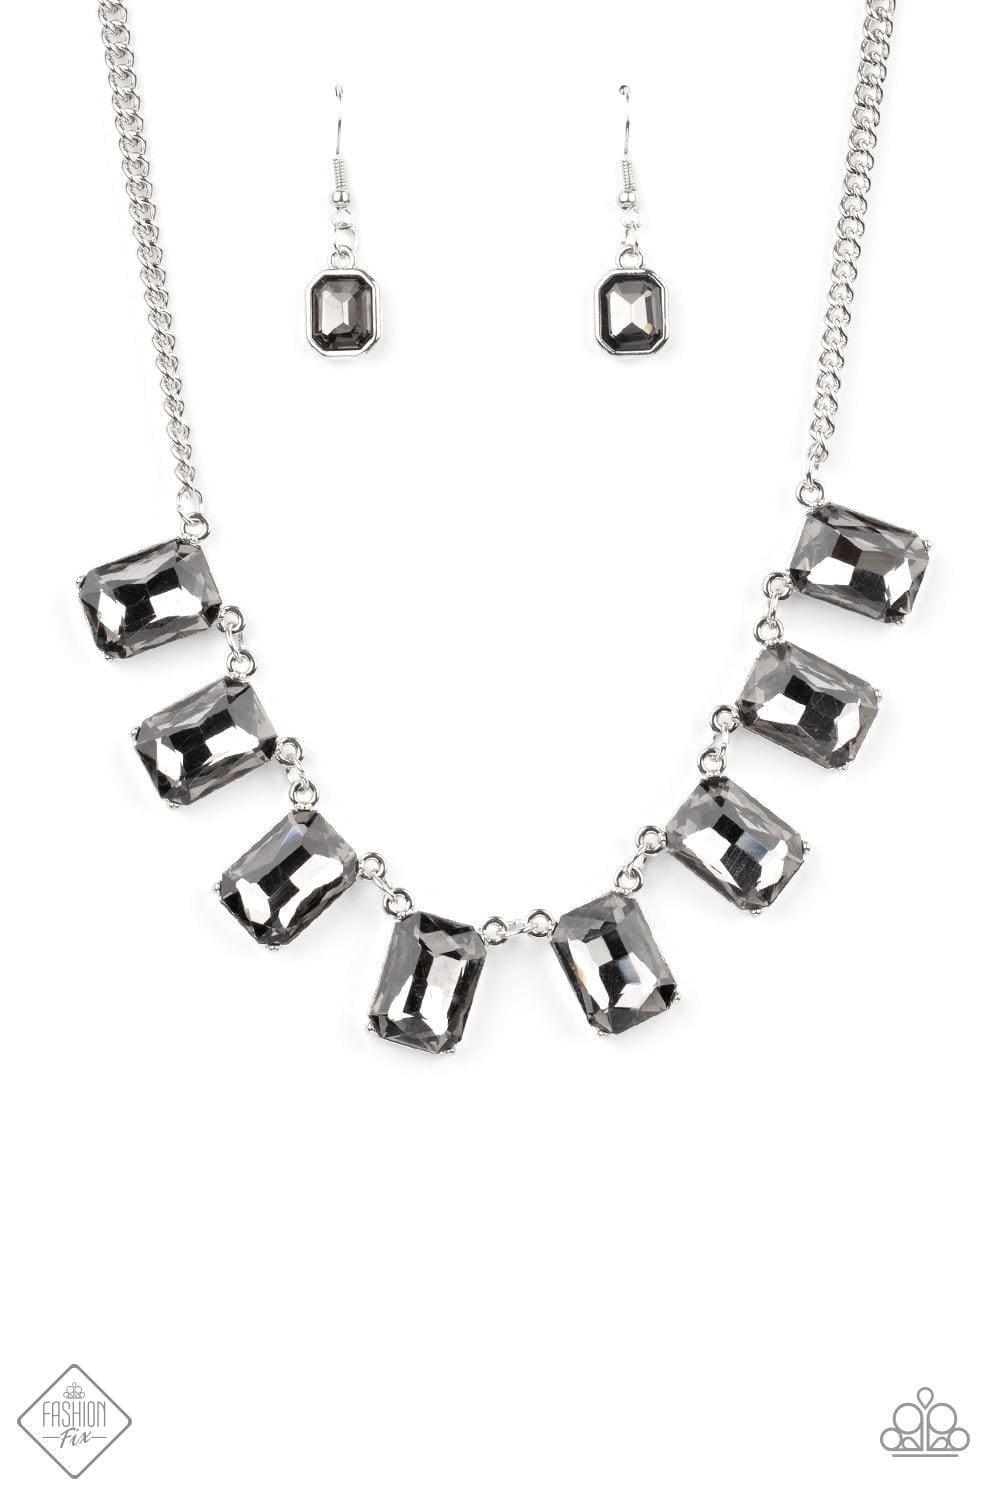 Paparazzi Accessories - After Party Access - Silver Necklace - Bling by JessieK